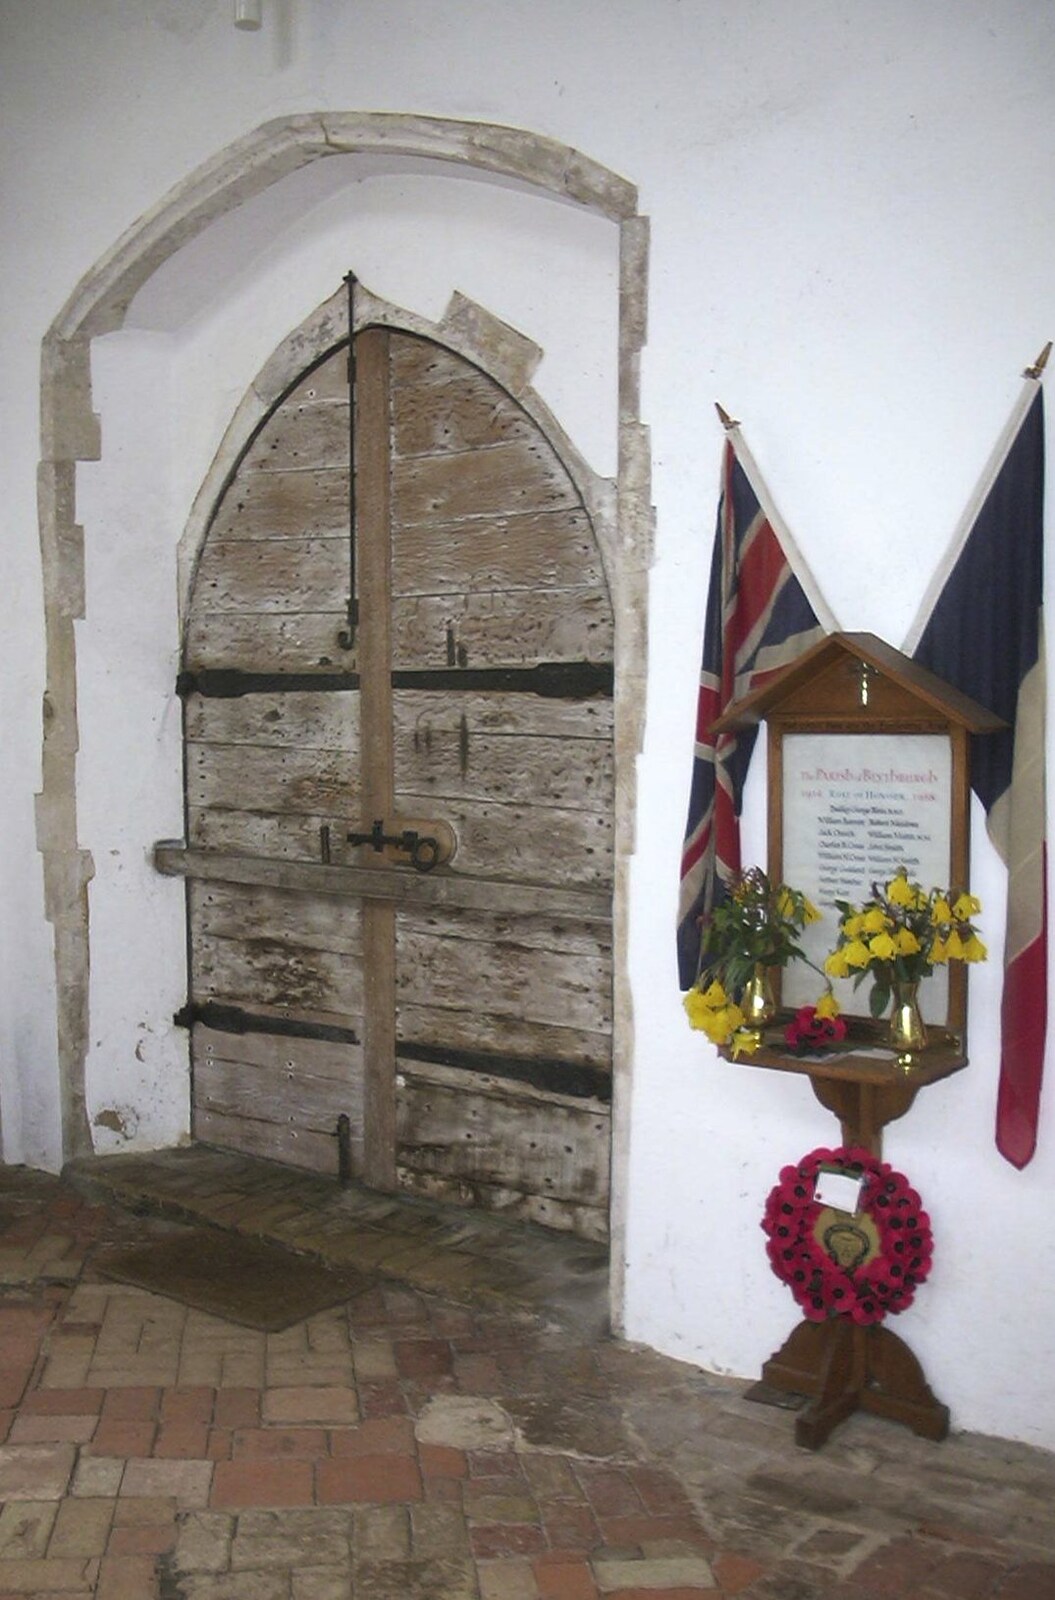 the church door, with Black Shuck's scorch marks from Moping in Southwold, Suffolk - 3rd April 2004